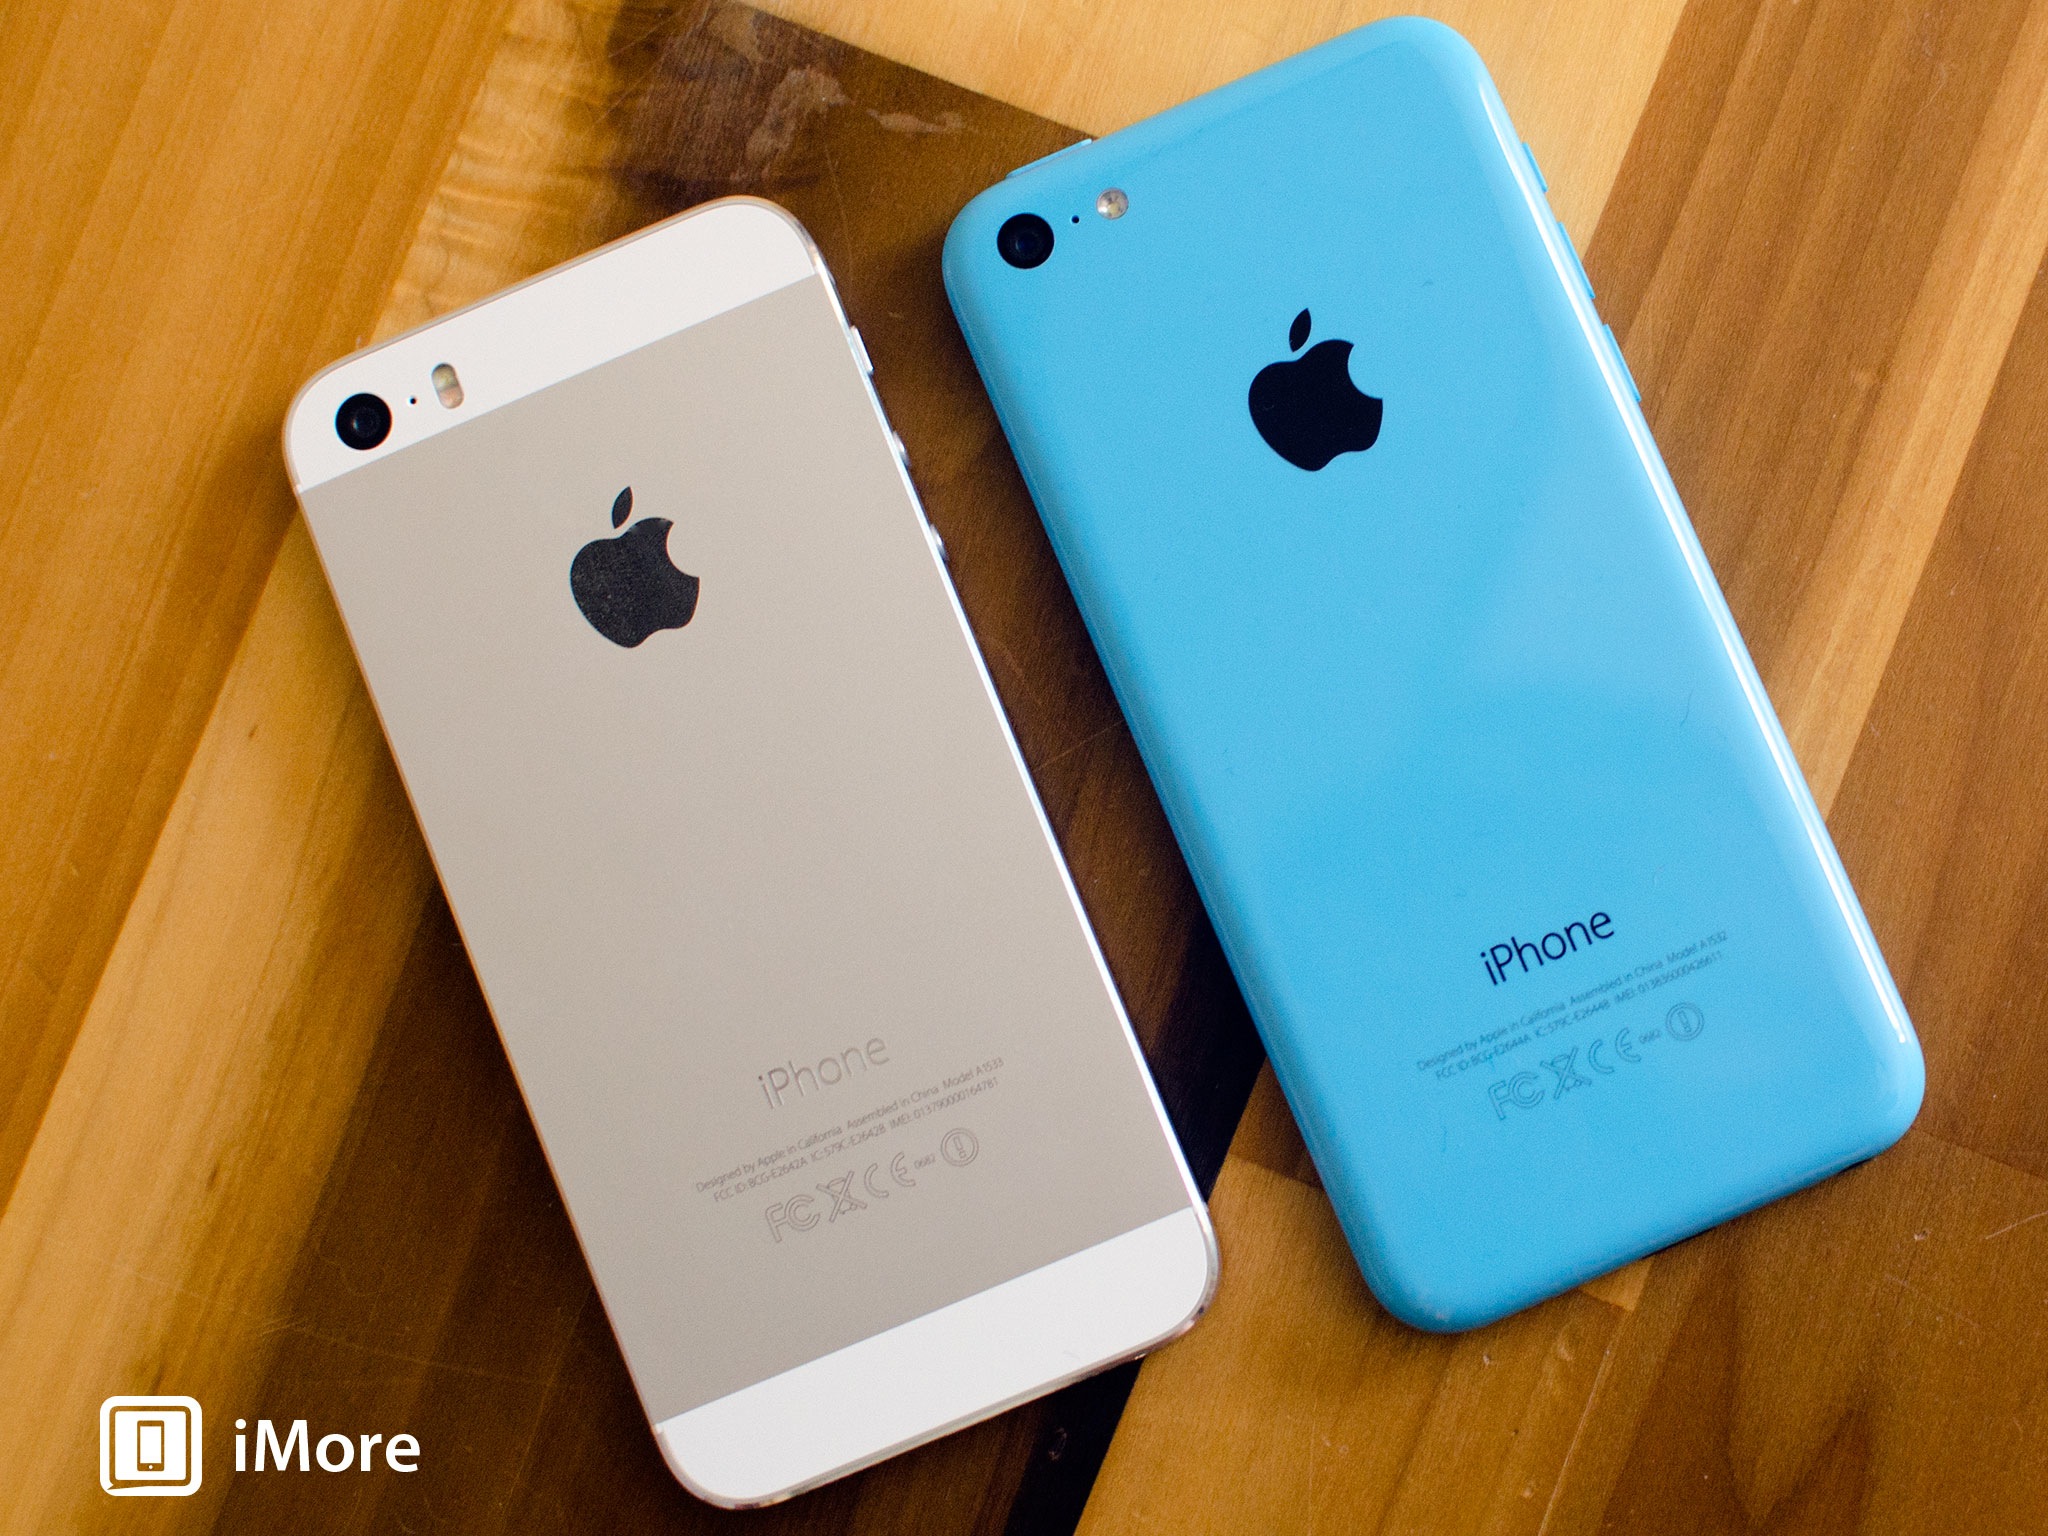 iPhone 5s and iPhone 5c come to more than 37 countries by Nov. 1